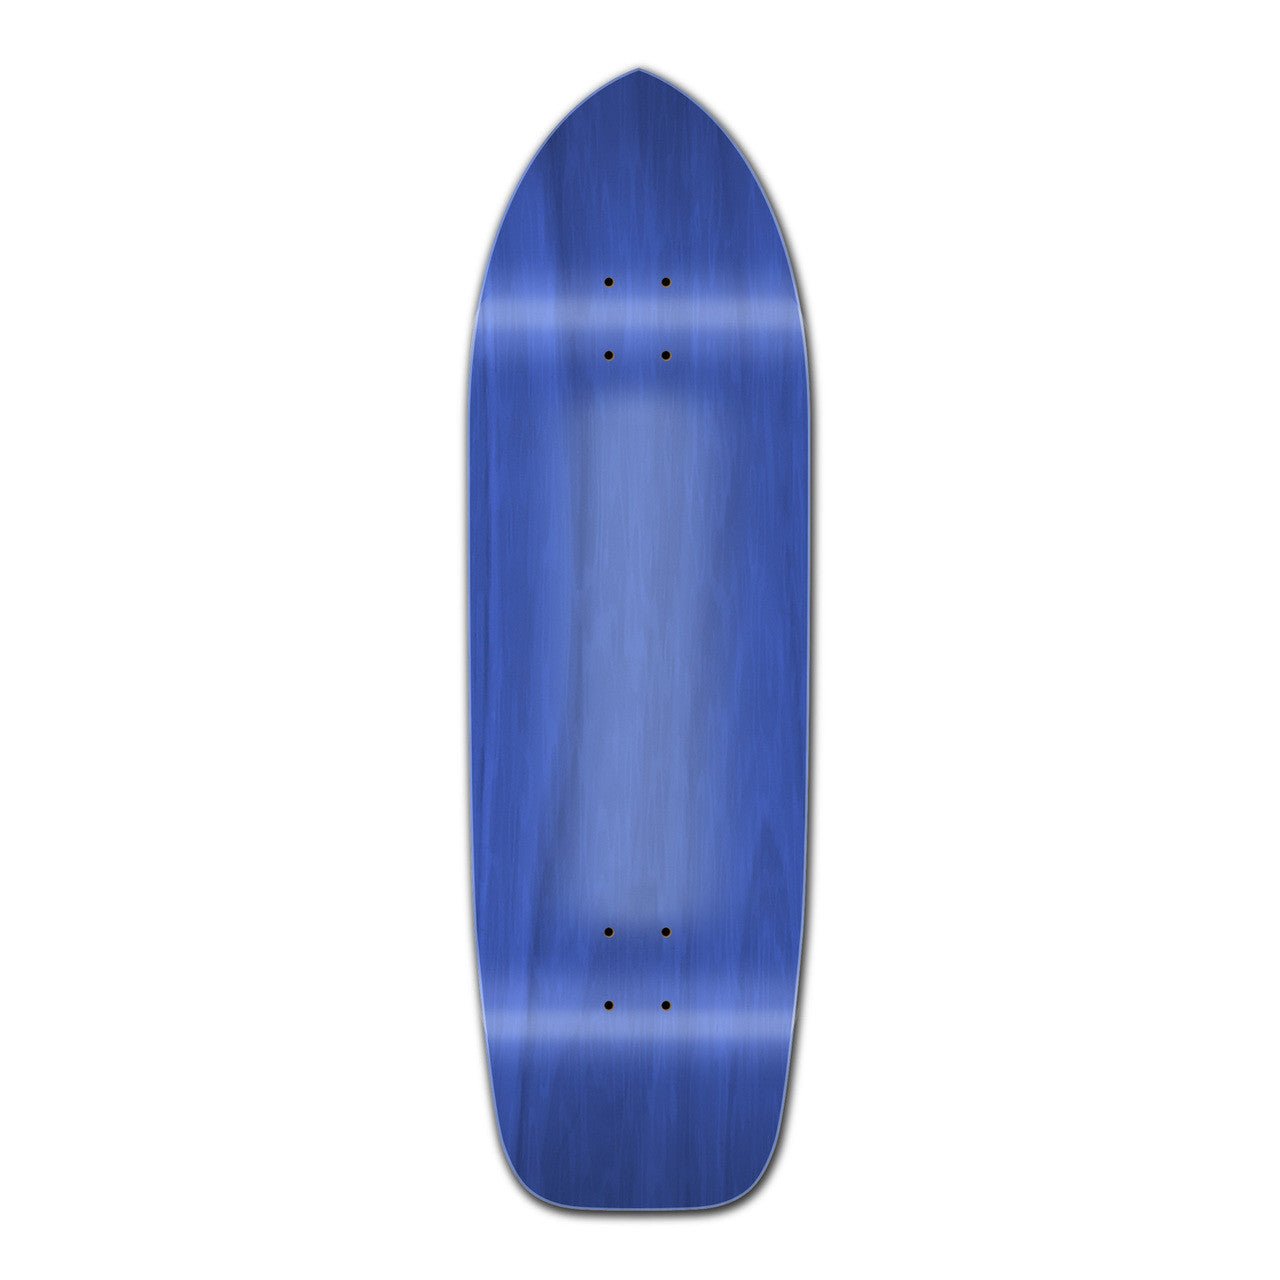 Yocaher Old School Longboard Deck - Stained Blue